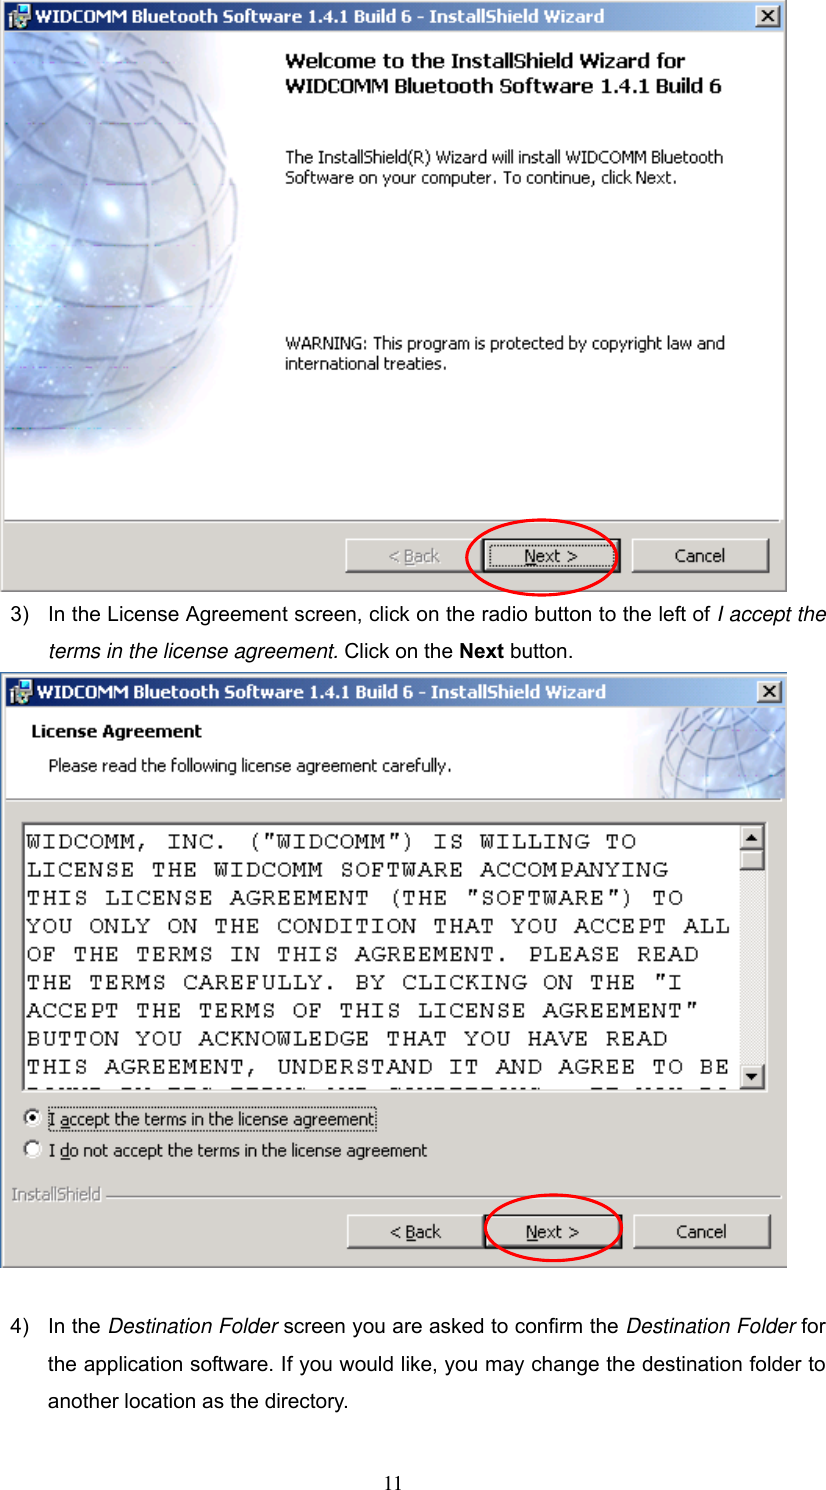  3)  In the License Agreement screen, click on the radio button to the left of I accept the terms in the license agreement. Click on the Next button.     4) In the Destination Folder screen you are asked to confirm the Destination Folder for the application software. If you would like, you may change the destination folder to another location as the directory.  11 